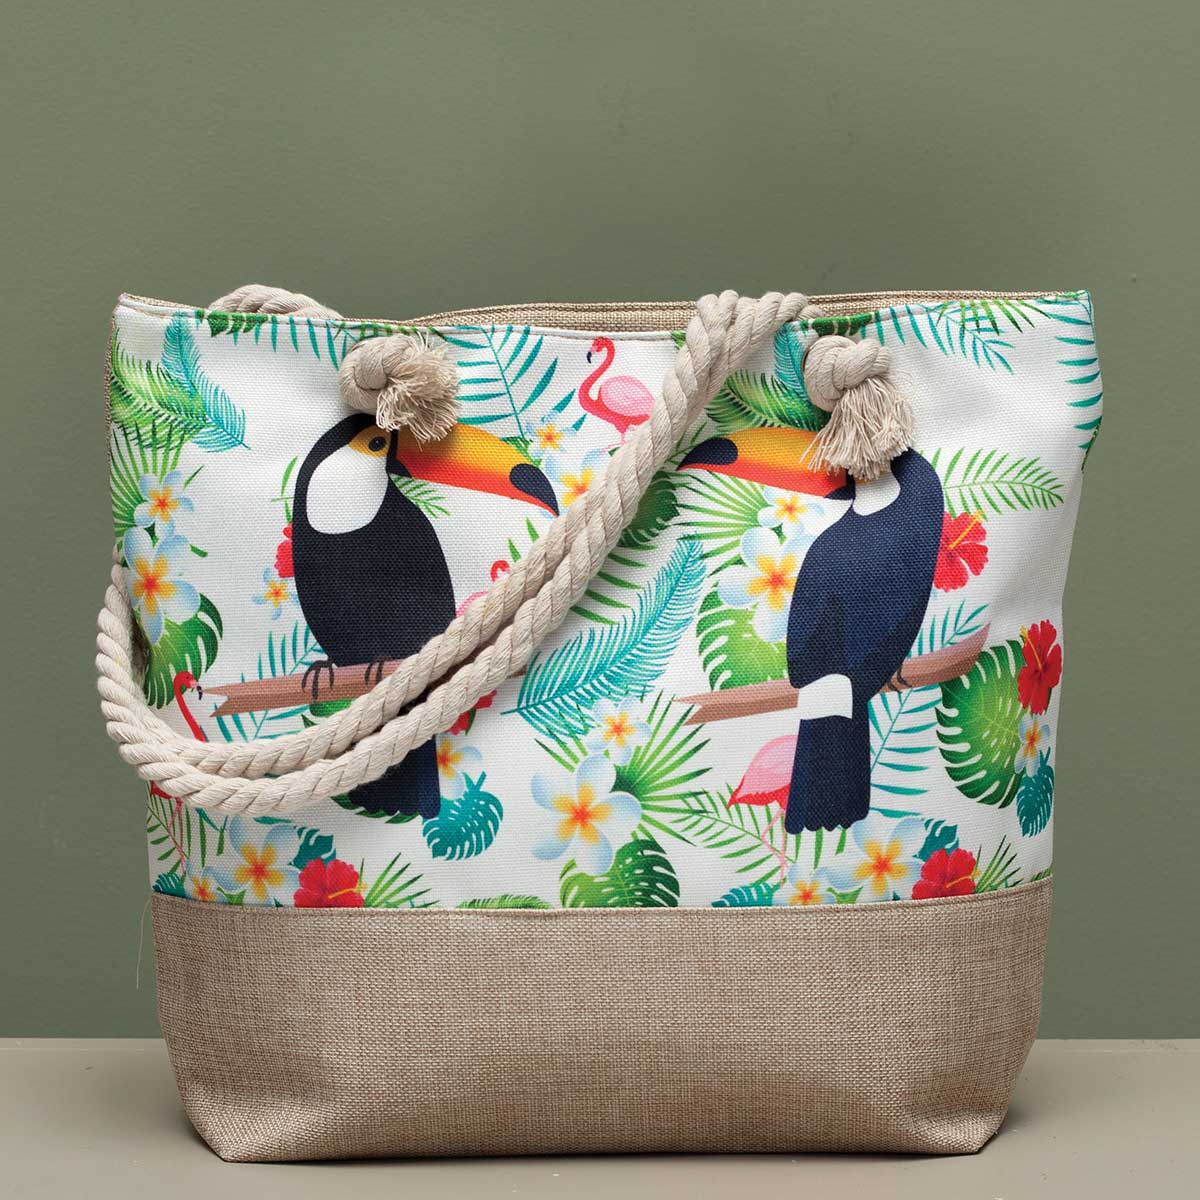 Toucan Tapestry Bag 17.5"x5"x14" with 10" Shoulder Strap and Zip